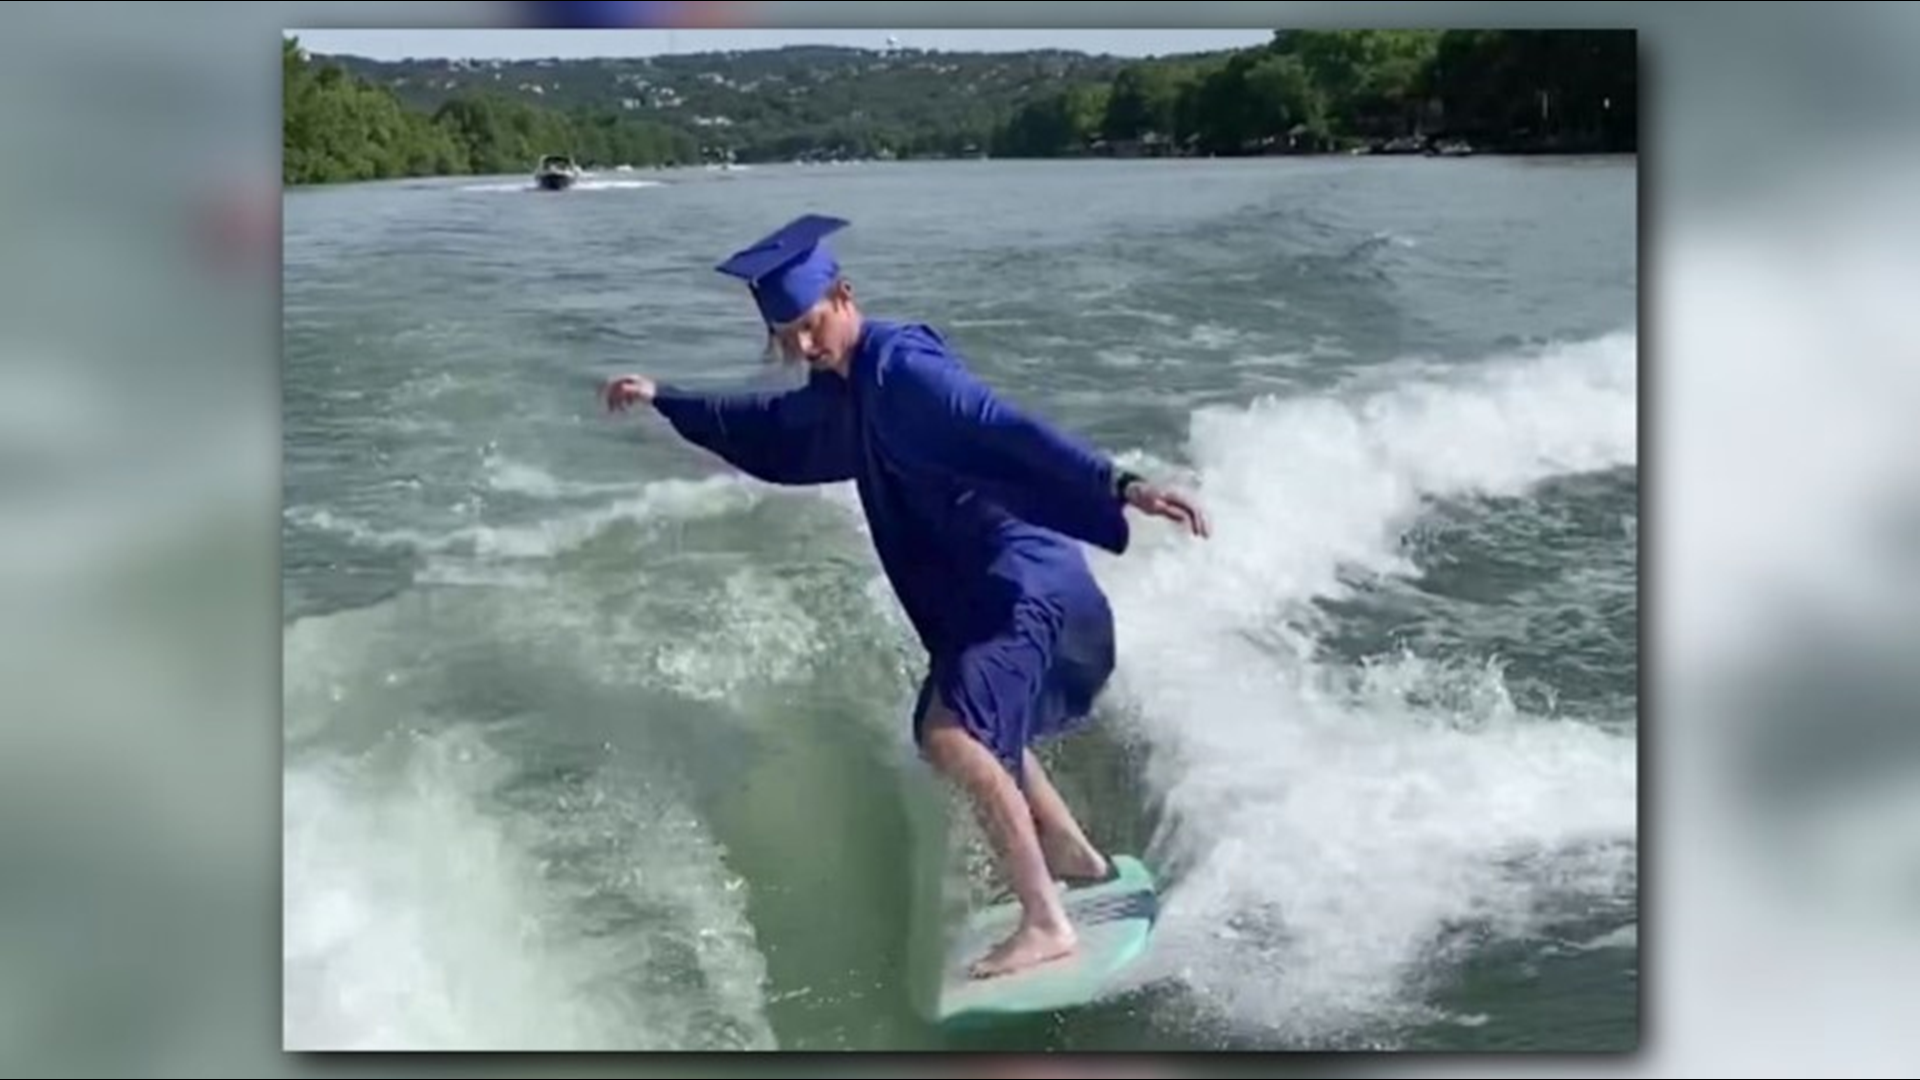 Jack Crawley celebrated graduation by wake surfing in his cap and gown. He and his twin sister Ally graduated from Austin's Westlake High School.